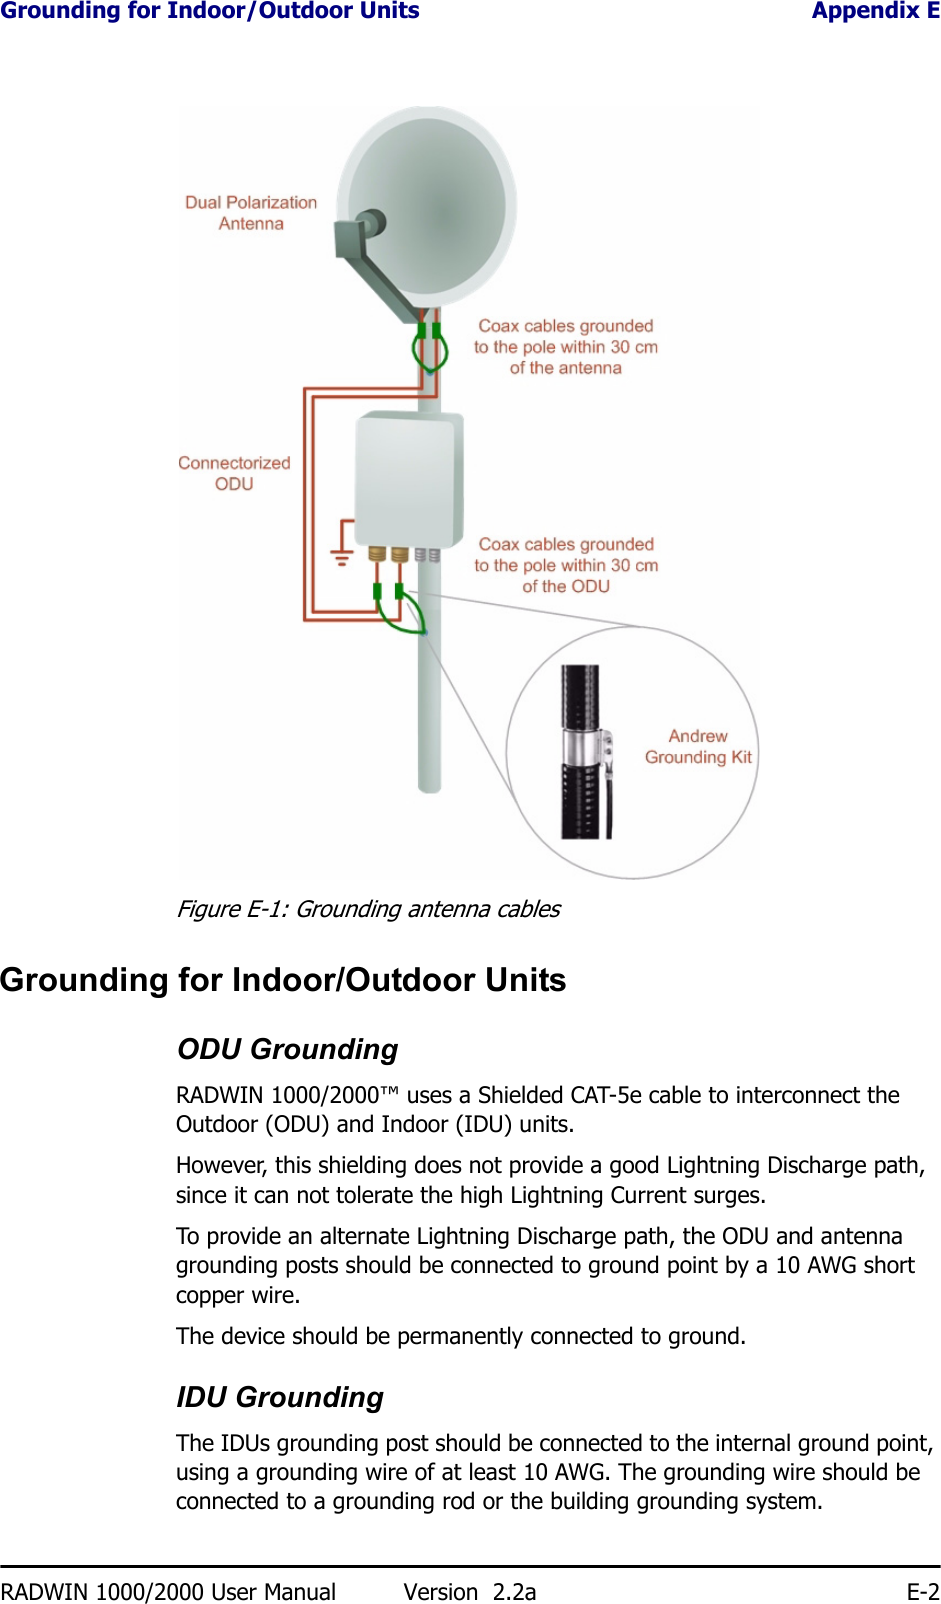 Grounding for Indoor/Outdoor Units Appendix ERADWIN 1000/2000 User Manual Version  2.2a E-2Figure E-1: Grounding antenna cablesGrounding for Indoor/Outdoor UnitsODU GroundingRADWIN 1000/2000™ uses a Shielded CAT-5e cable to interconnect the Outdoor (ODU) and Indoor (IDU) units. However, this shielding does not provide a good Lightning Discharge path, since it can not tolerate the high Lightning Current surges.To provide an alternate Lightning Discharge path, the ODU and antenna grounding posts should be connected to ground point by a 10 AWG short copper wire.The device should be permanently connected to ground.IDU GroundingThe IDUs grounding post should be connected to the internal ground point, using a grounding wire of at least 10 AWG. The grounding wire should be connected to a grounding rod or the building grounding system.